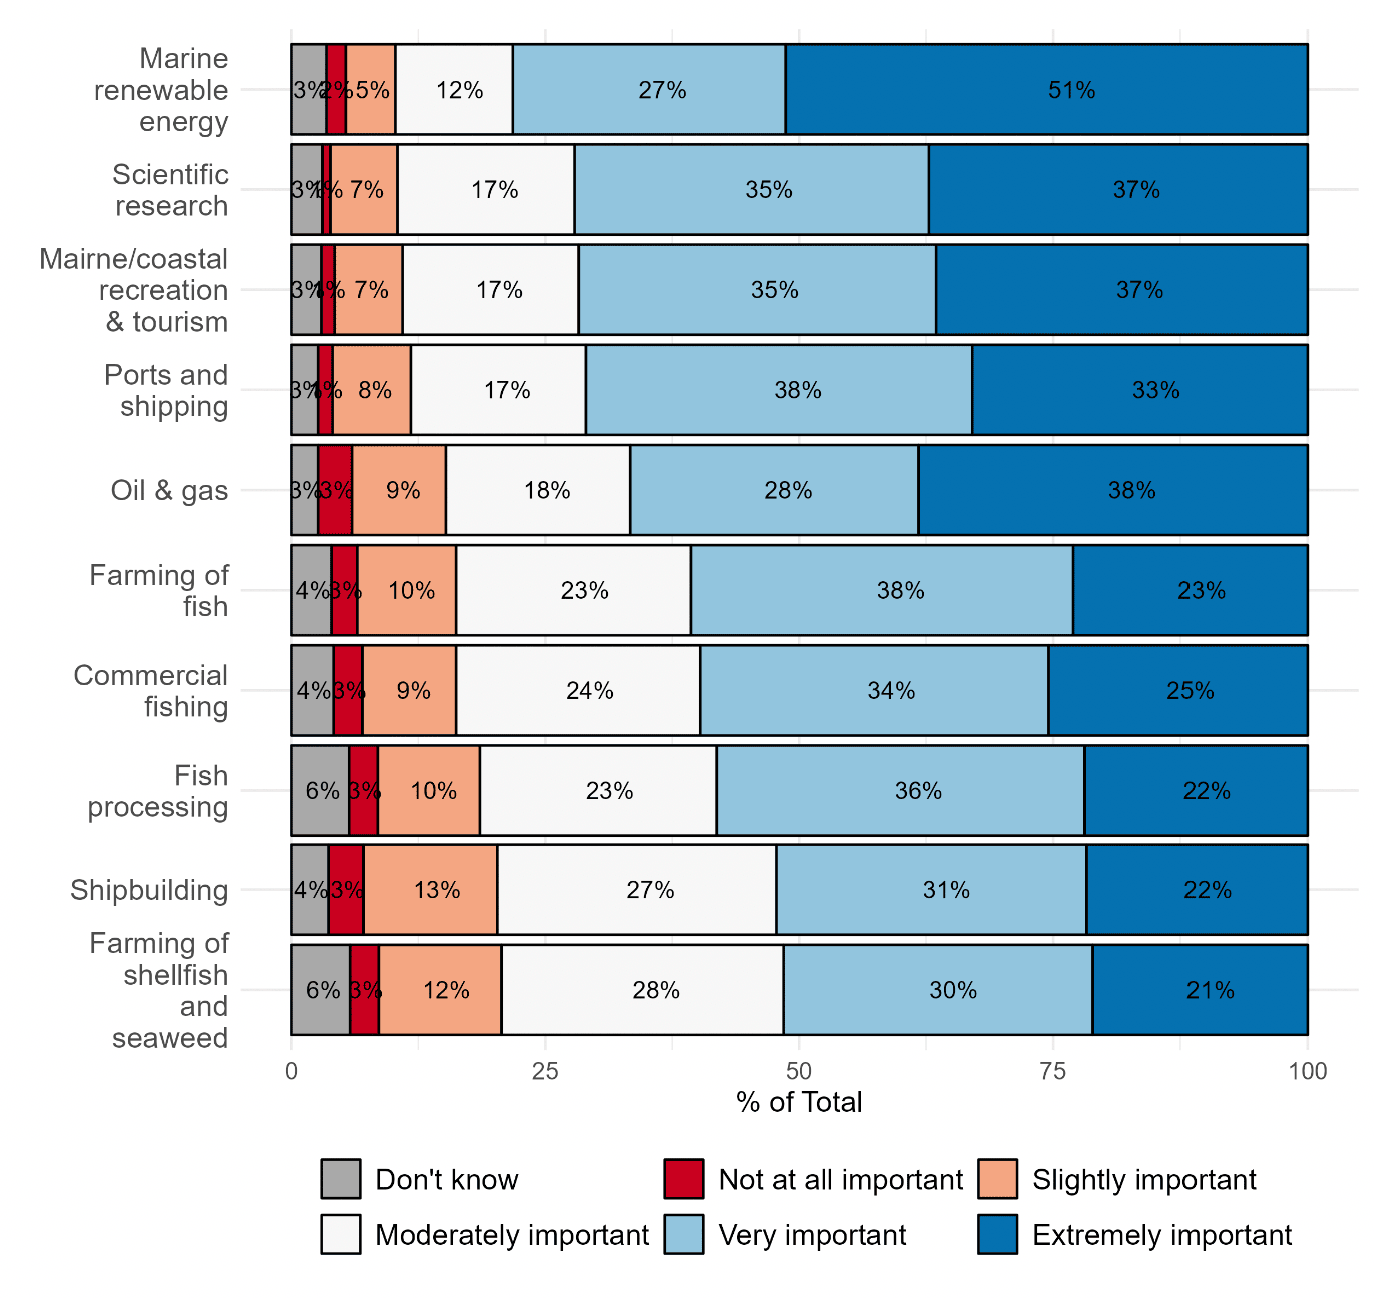 Chart showing responses to question about how important respondents thought industries are for Scotland's future. Chart shows marine renewable energy considered to be most important.